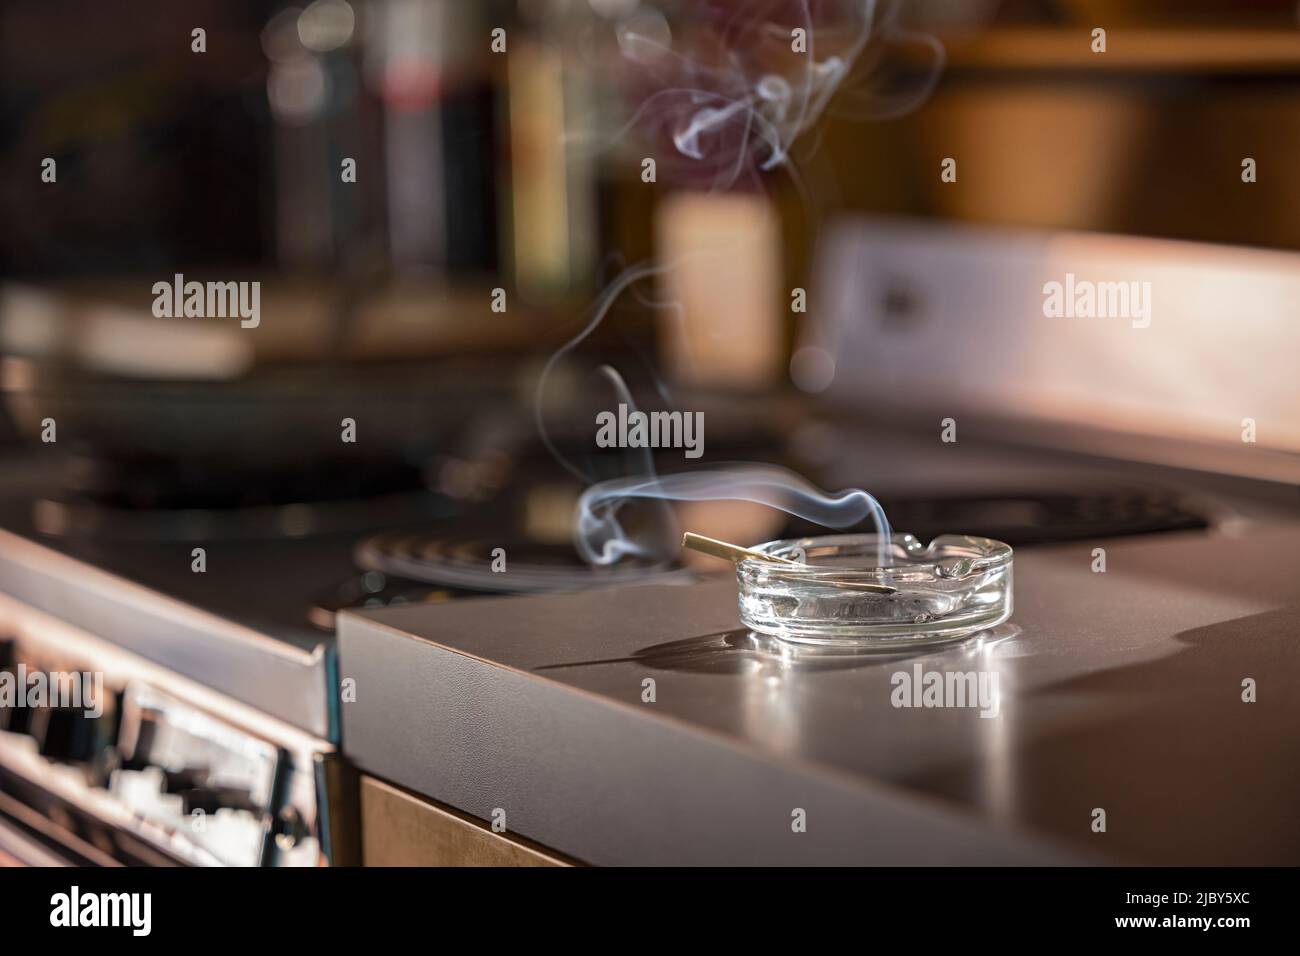 Home Interior, detail of ashtray that has a lit CBD pre-roll joint, cigarette with smoke rising sitting in kitchen next to stove top Stock Photo